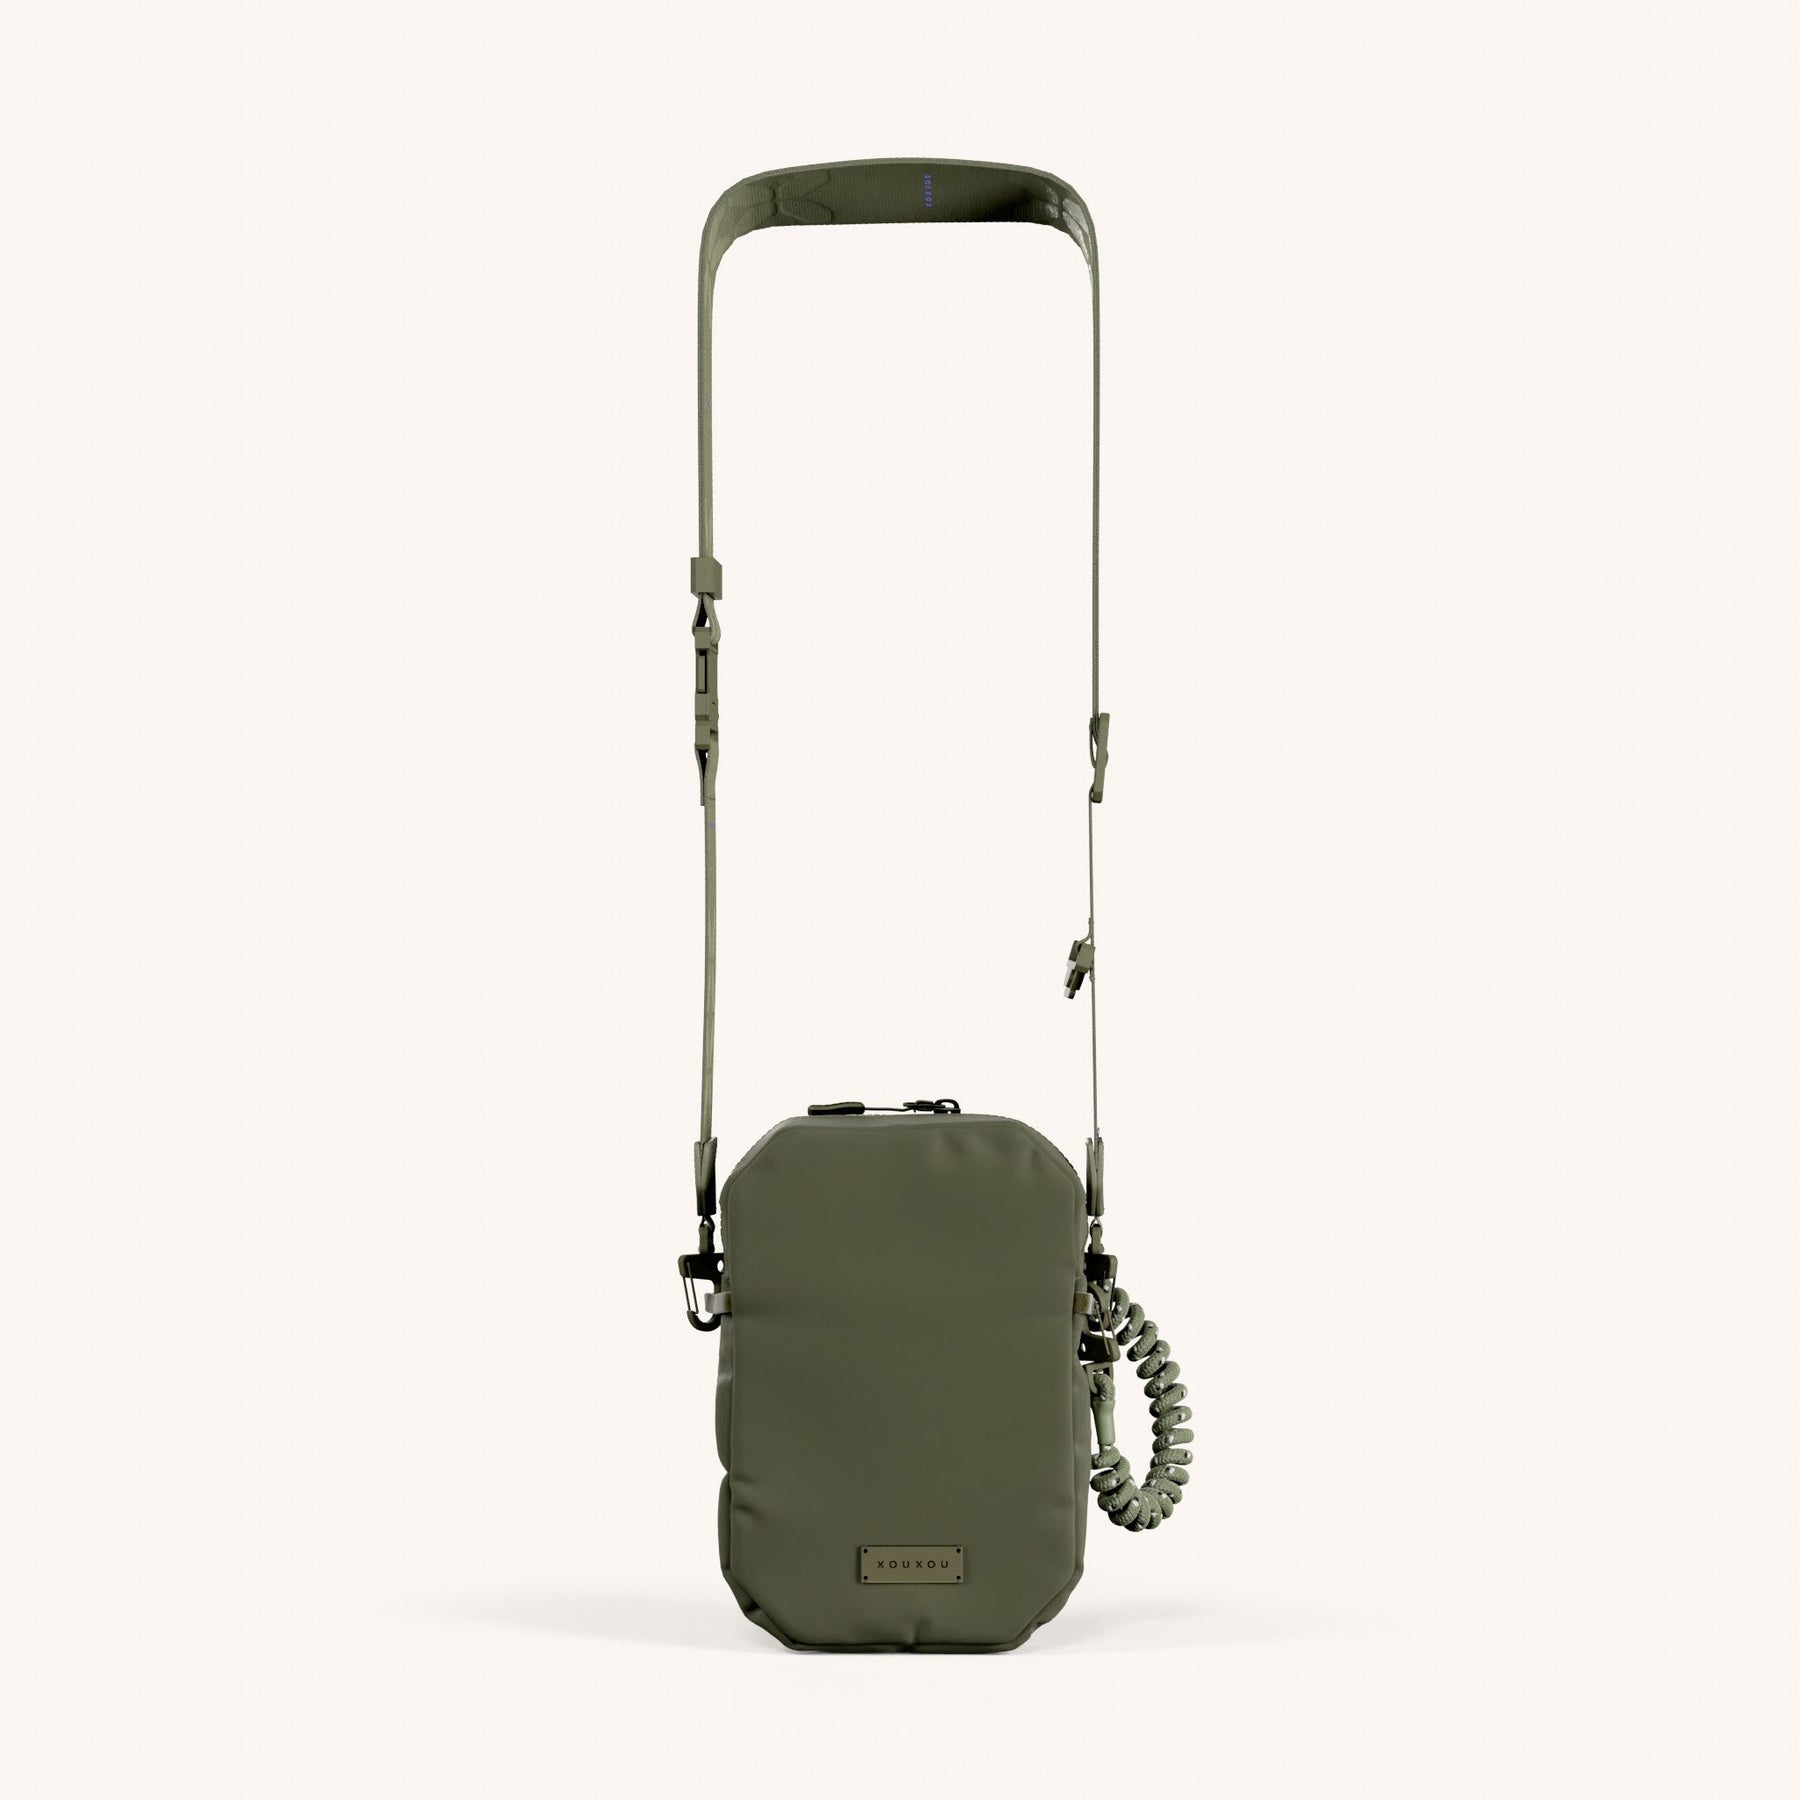 Shoulder Bag with Ultrawide Lanyard in Moss Total View | XOUXOU